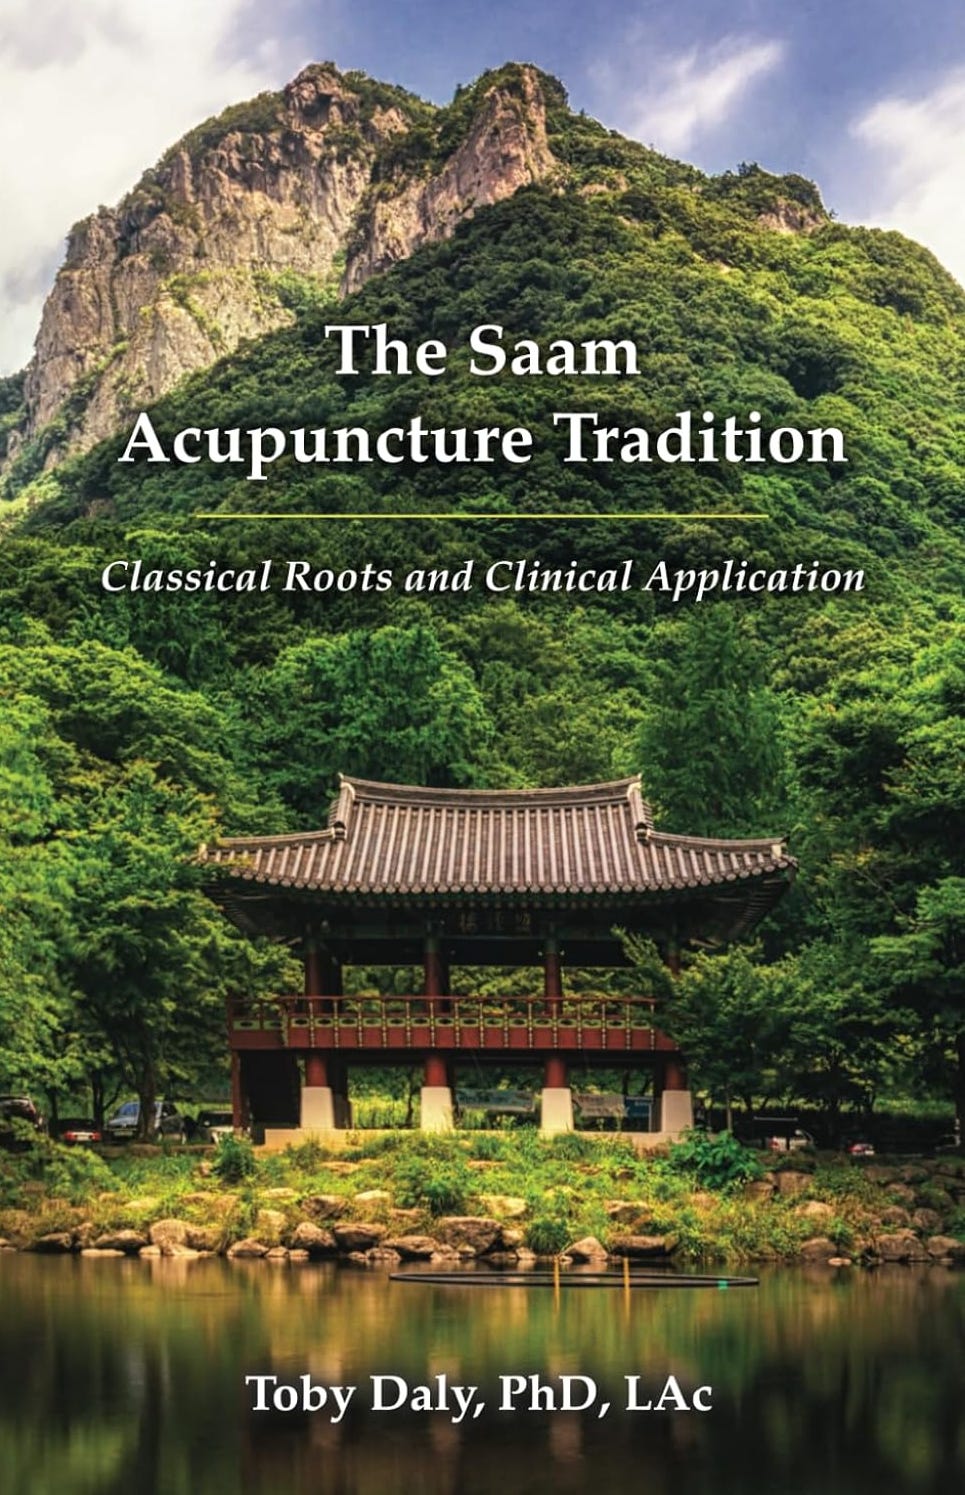 Toby Daly's new Saam acupuncture book